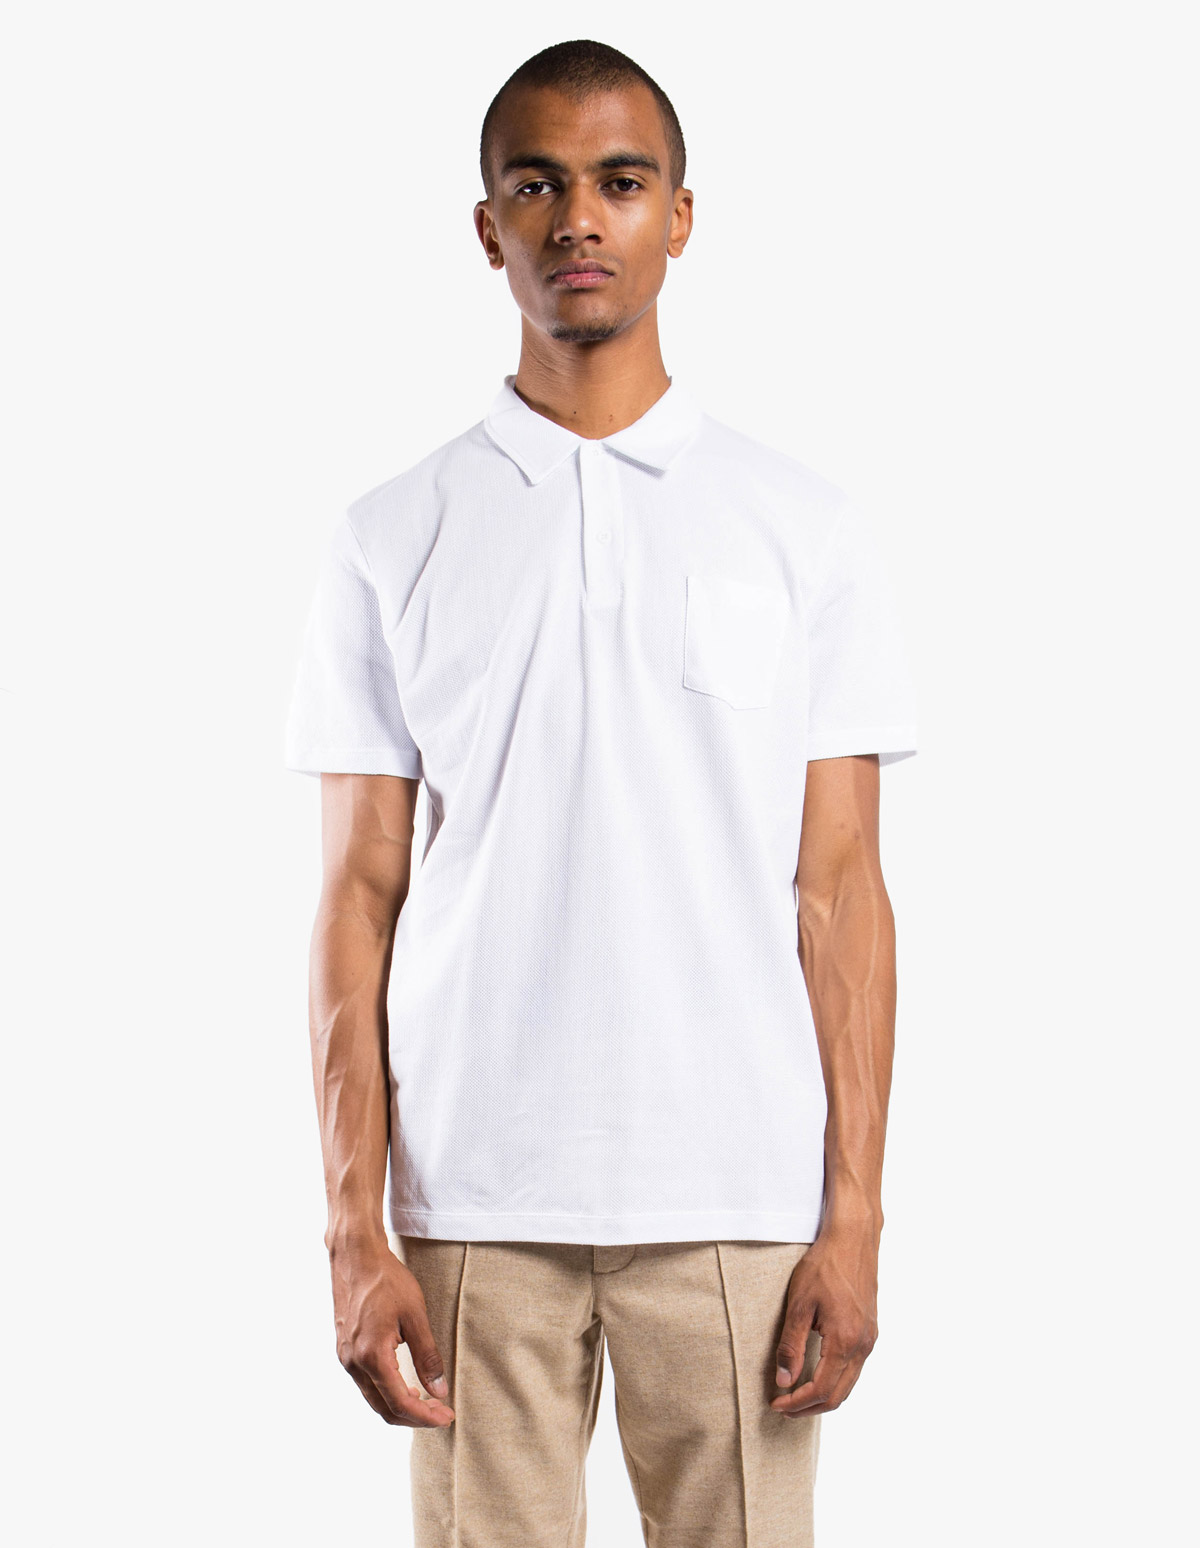 Short Sleeve Riviera Polo in White - Sunspel | Afura Store